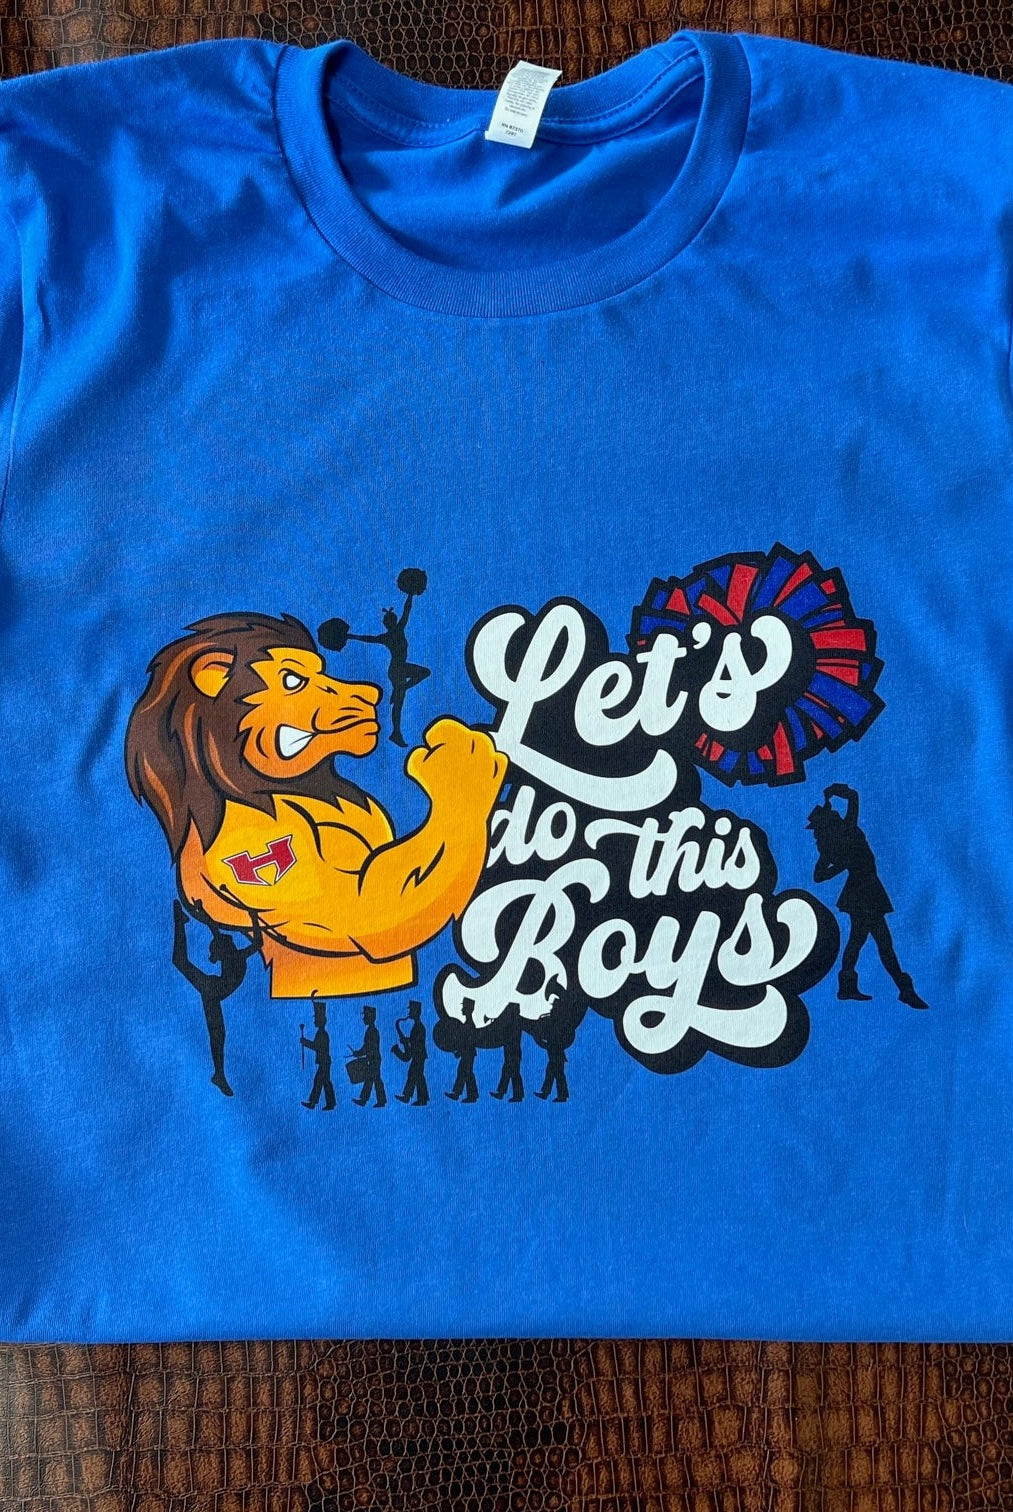 Let's Do This Boys Graphic Tee-Graphic Tees-Deadwood South Boutique & Company-Deadwood South Boutique, Women's Fashion Boutique in Henderson, TX